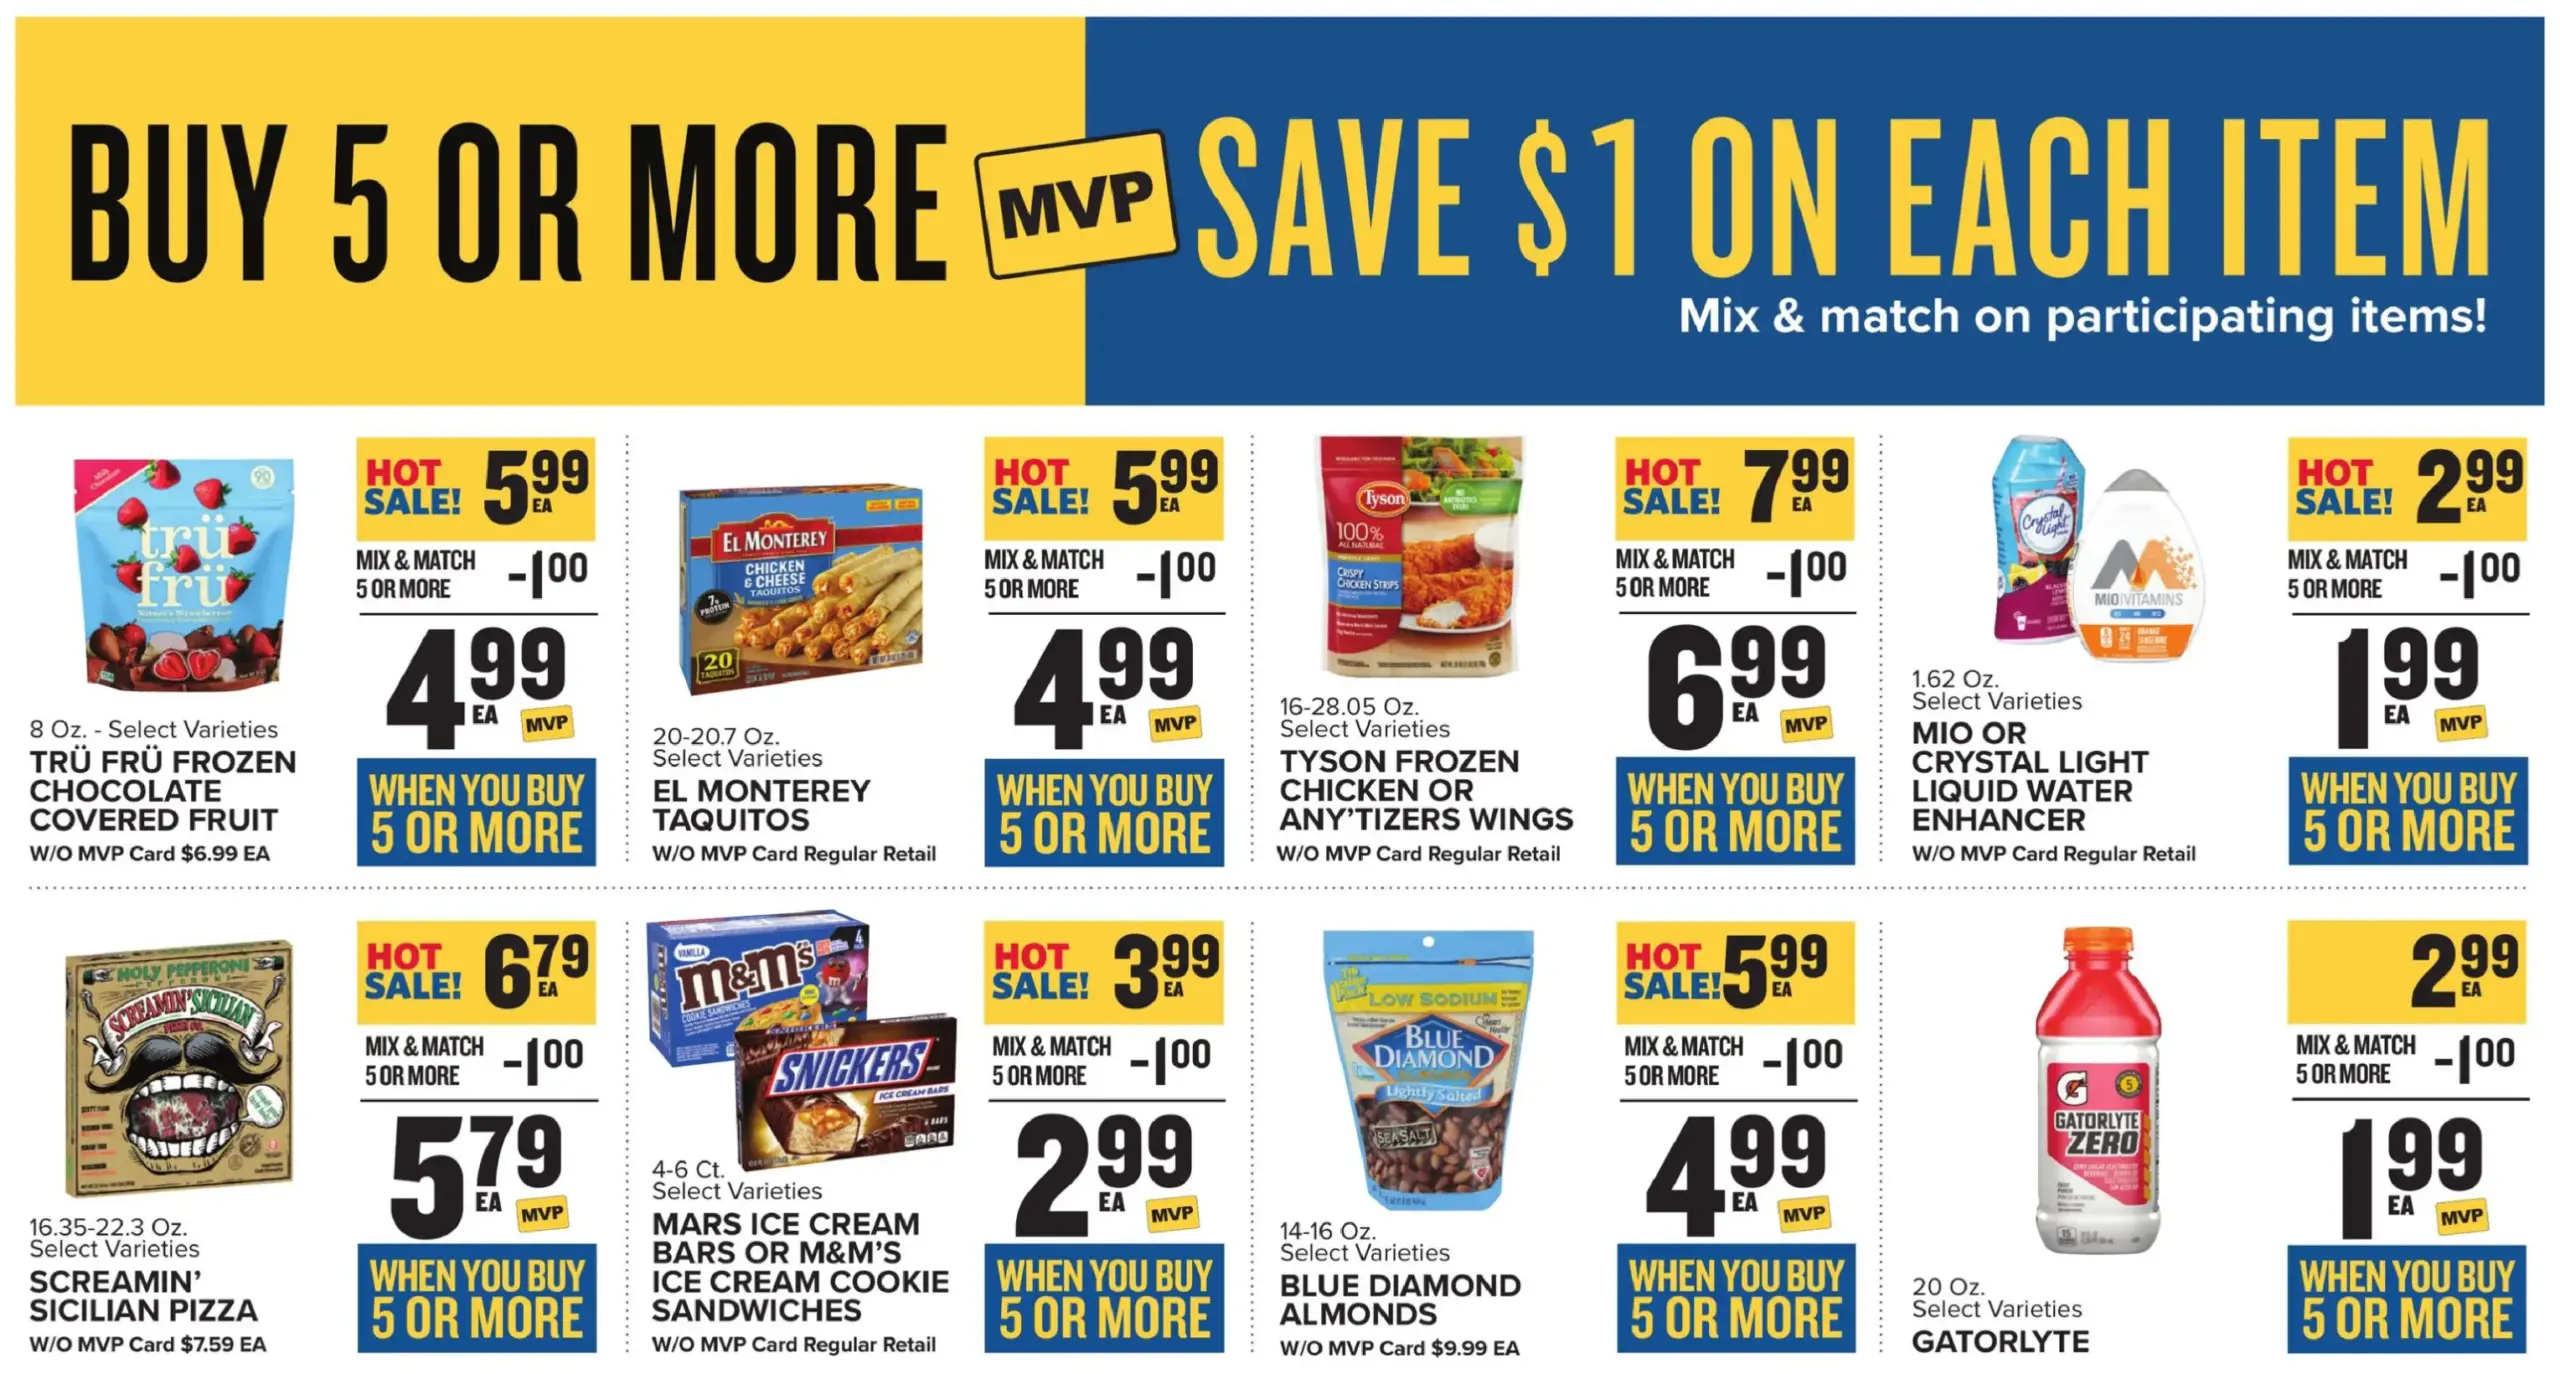 Food Lion Weekly Ad July 2024 Weekly Sales, Deals, Discounts and Digital Coupons.